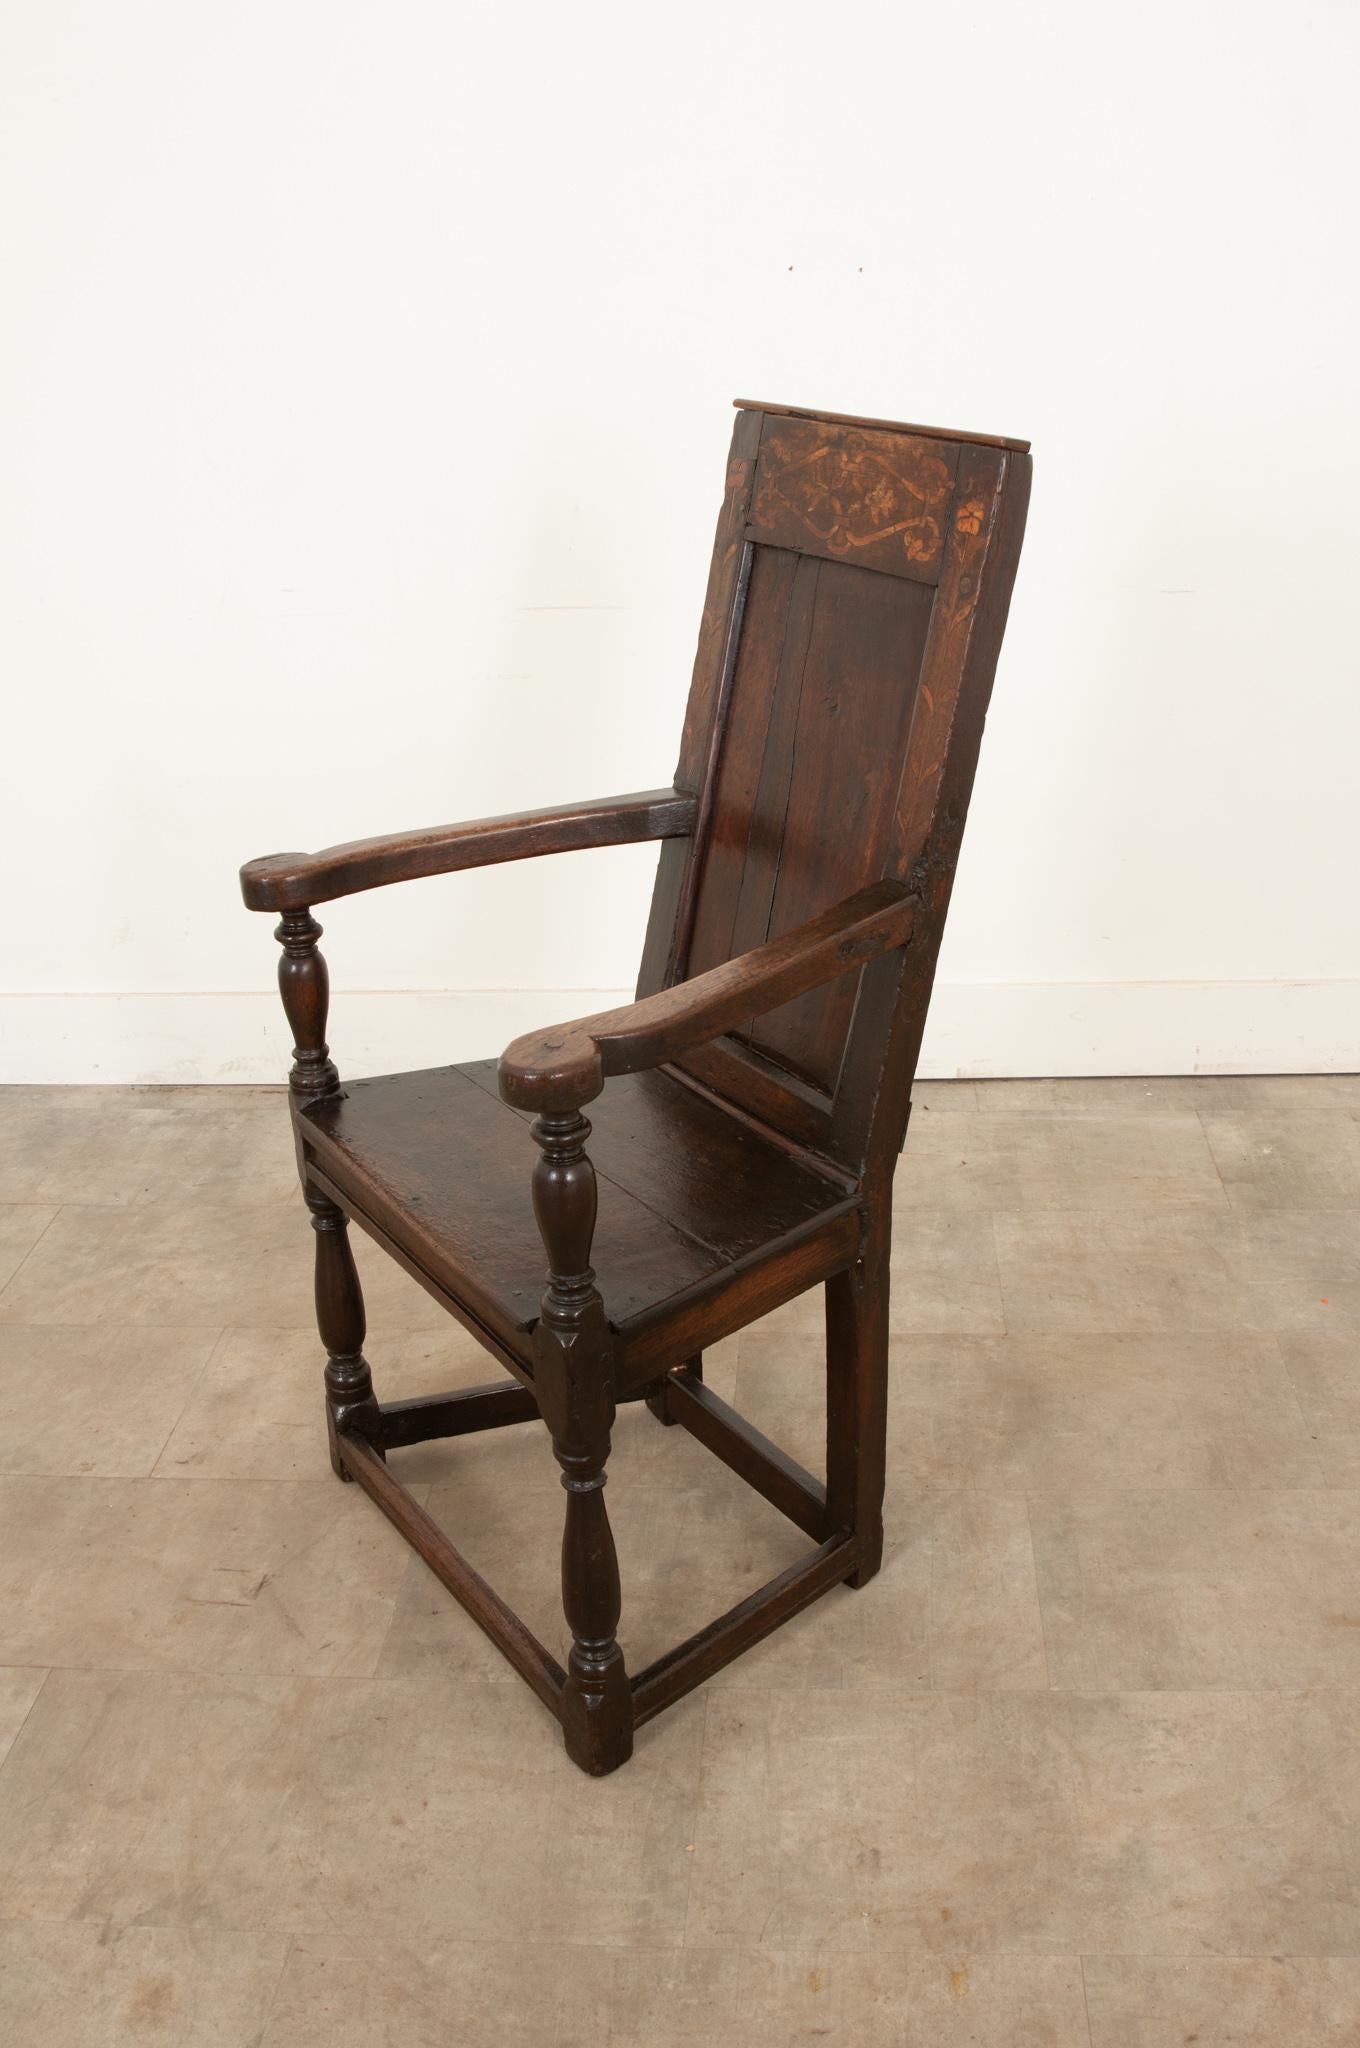 English 18th Century Oak Wainscot Chair In Good Condition For Sale In Baton Rouge, LA